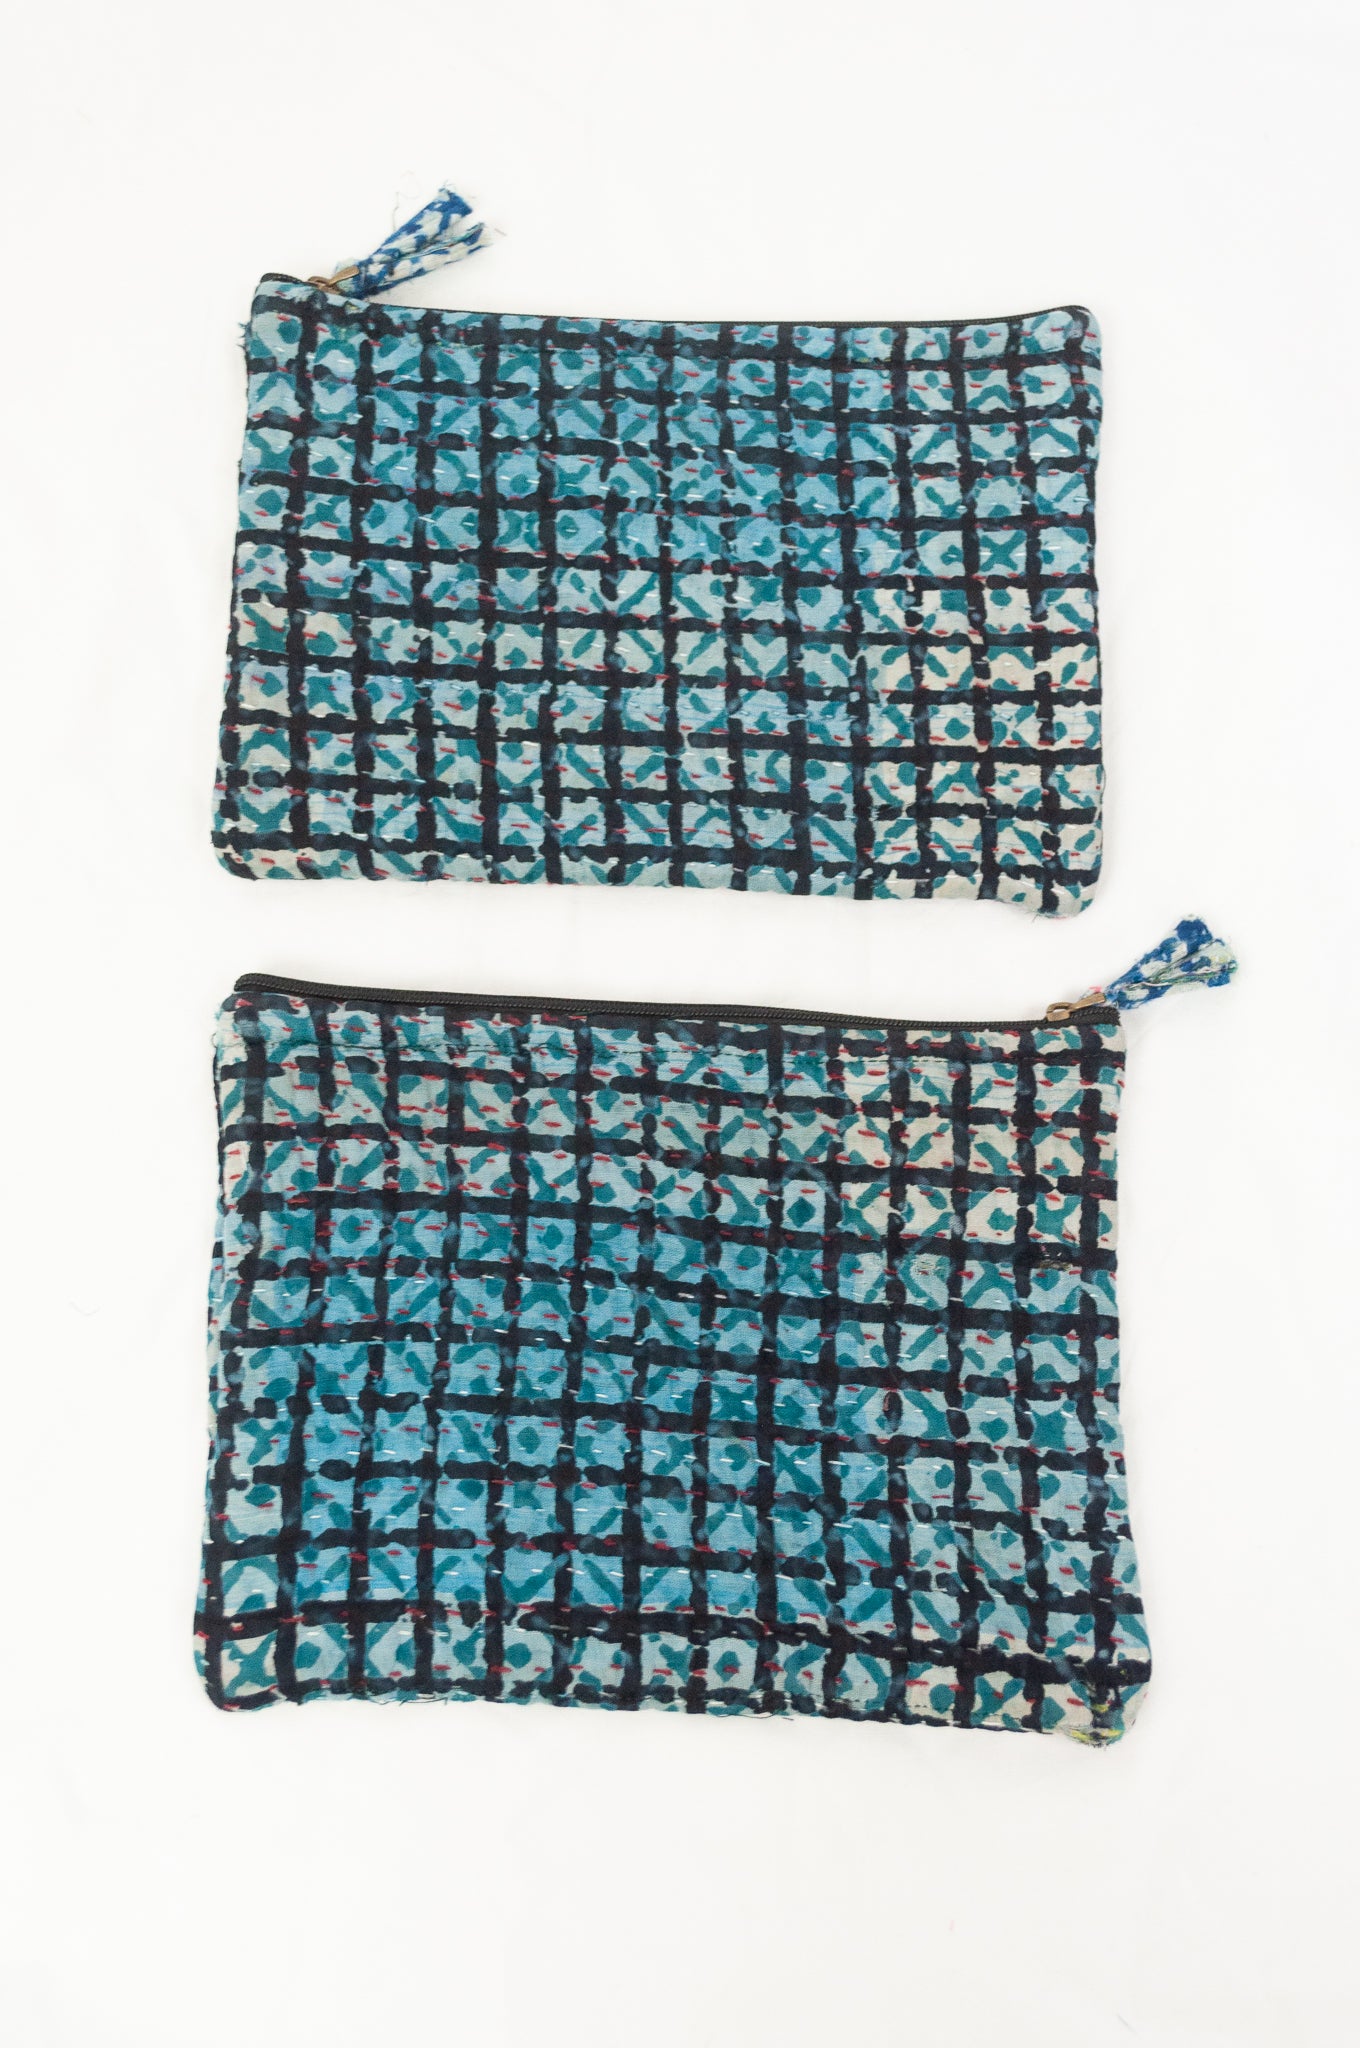 Zippered cotton pouches made from vintage kantha quilt remnants in blue, green and black blockprinted design.